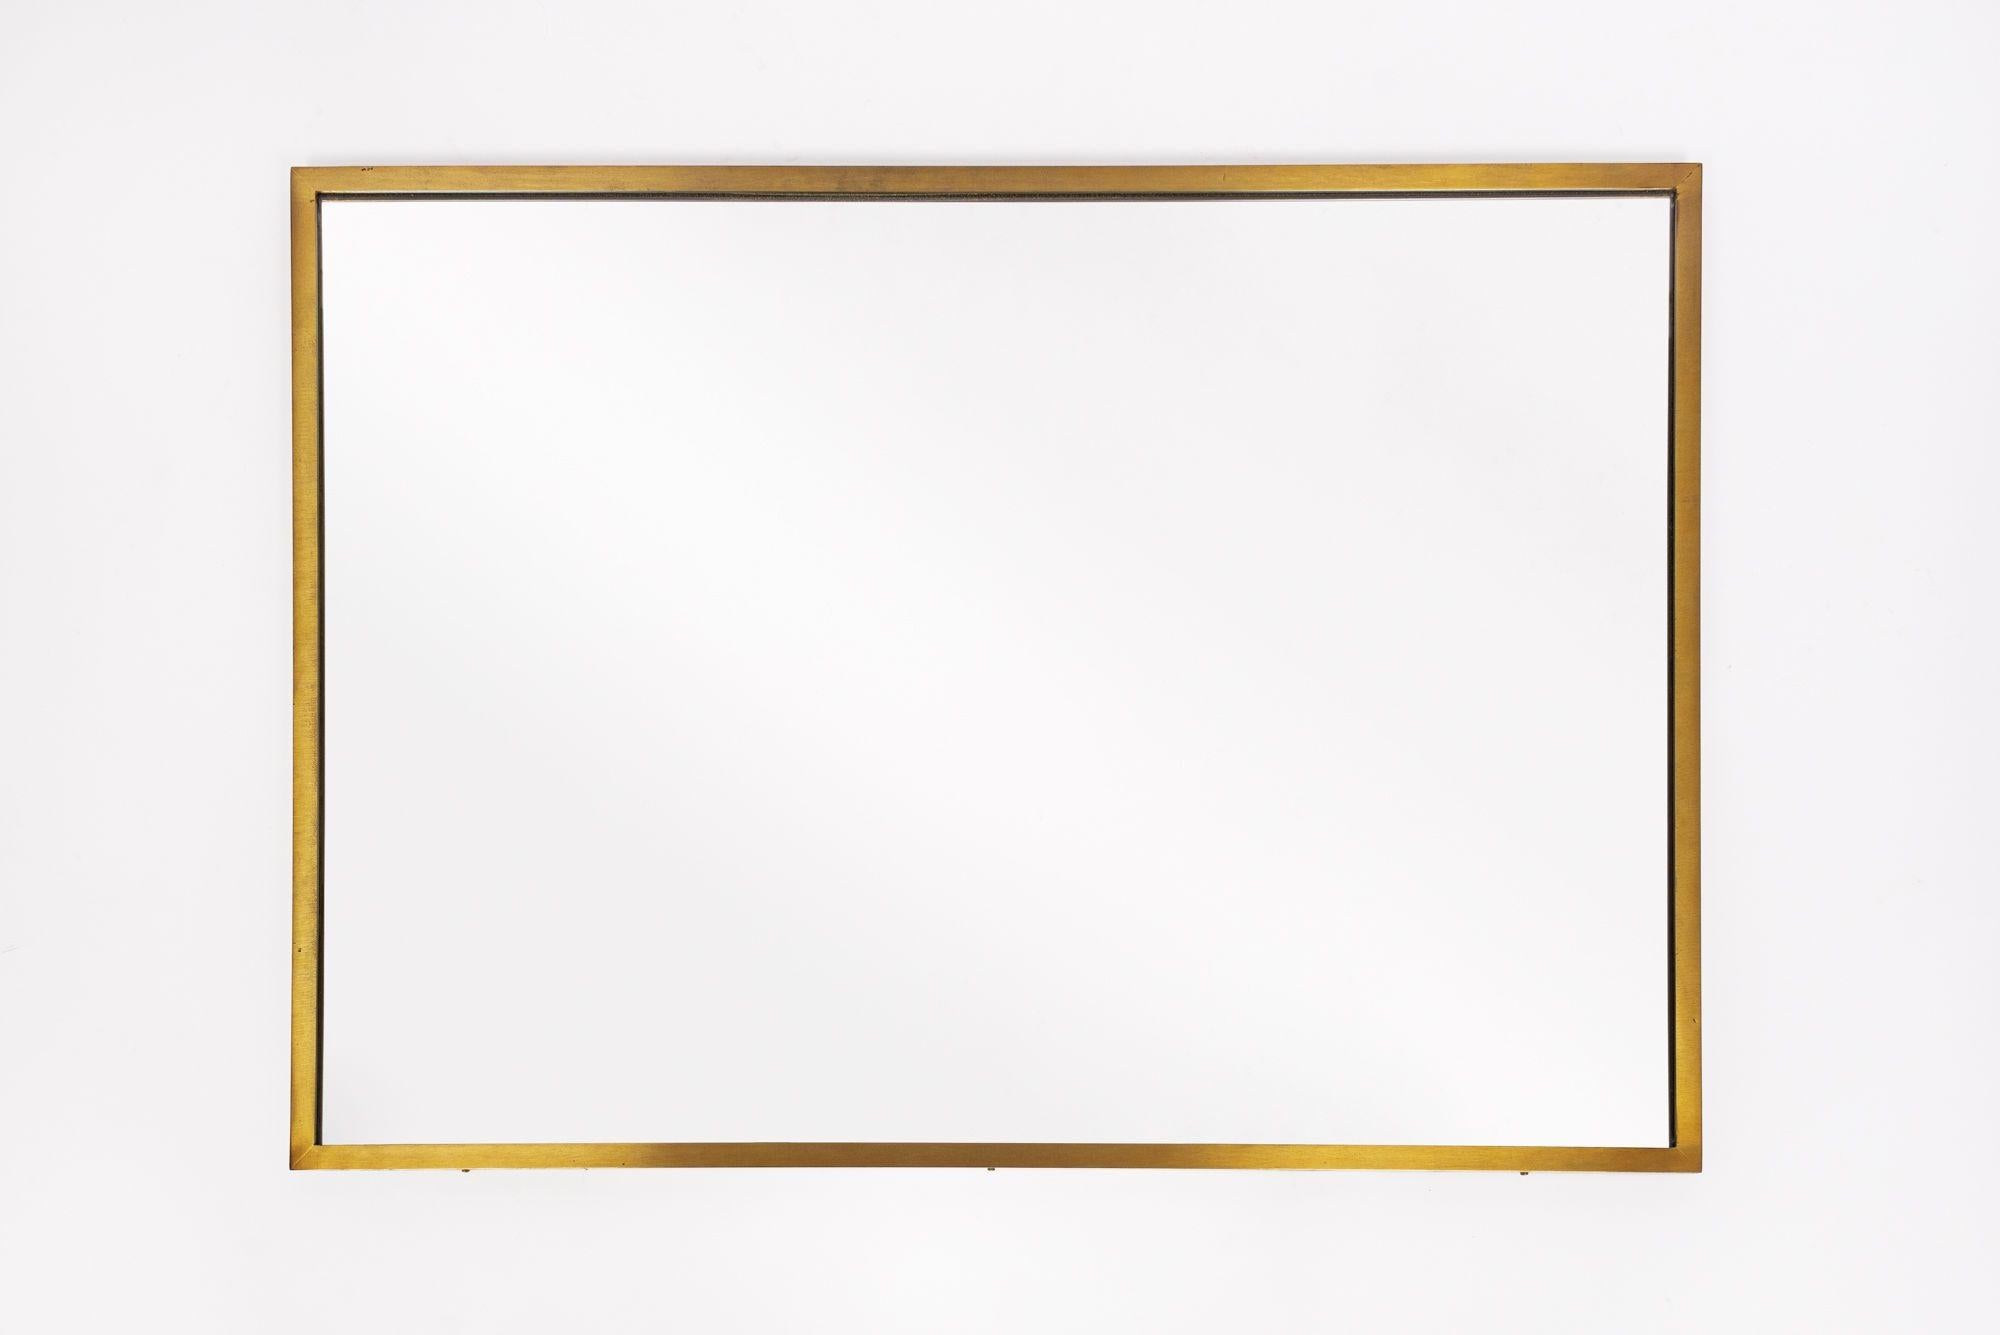 Minimalist Vintage Gold Solid Brass Large Hanging Wall Mirror 30 x 42